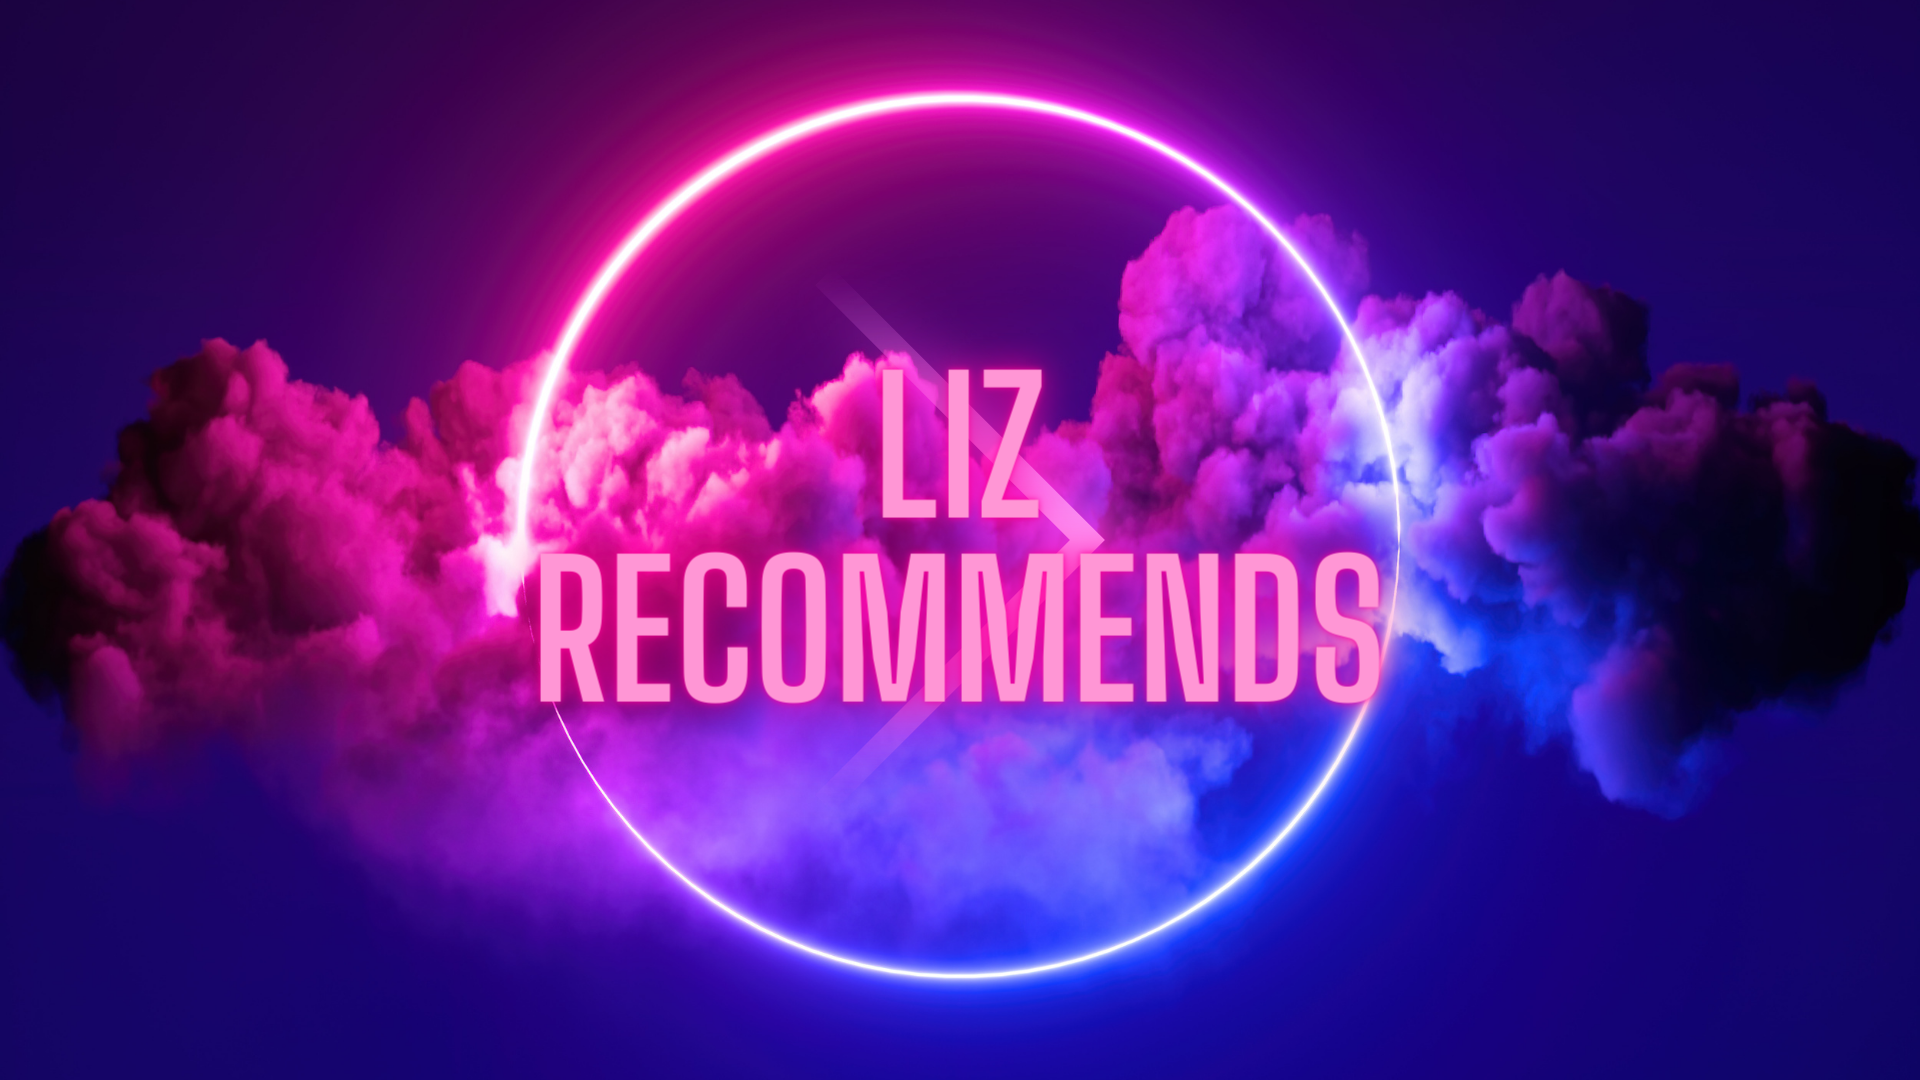 liz recommends. therapist approved books and 